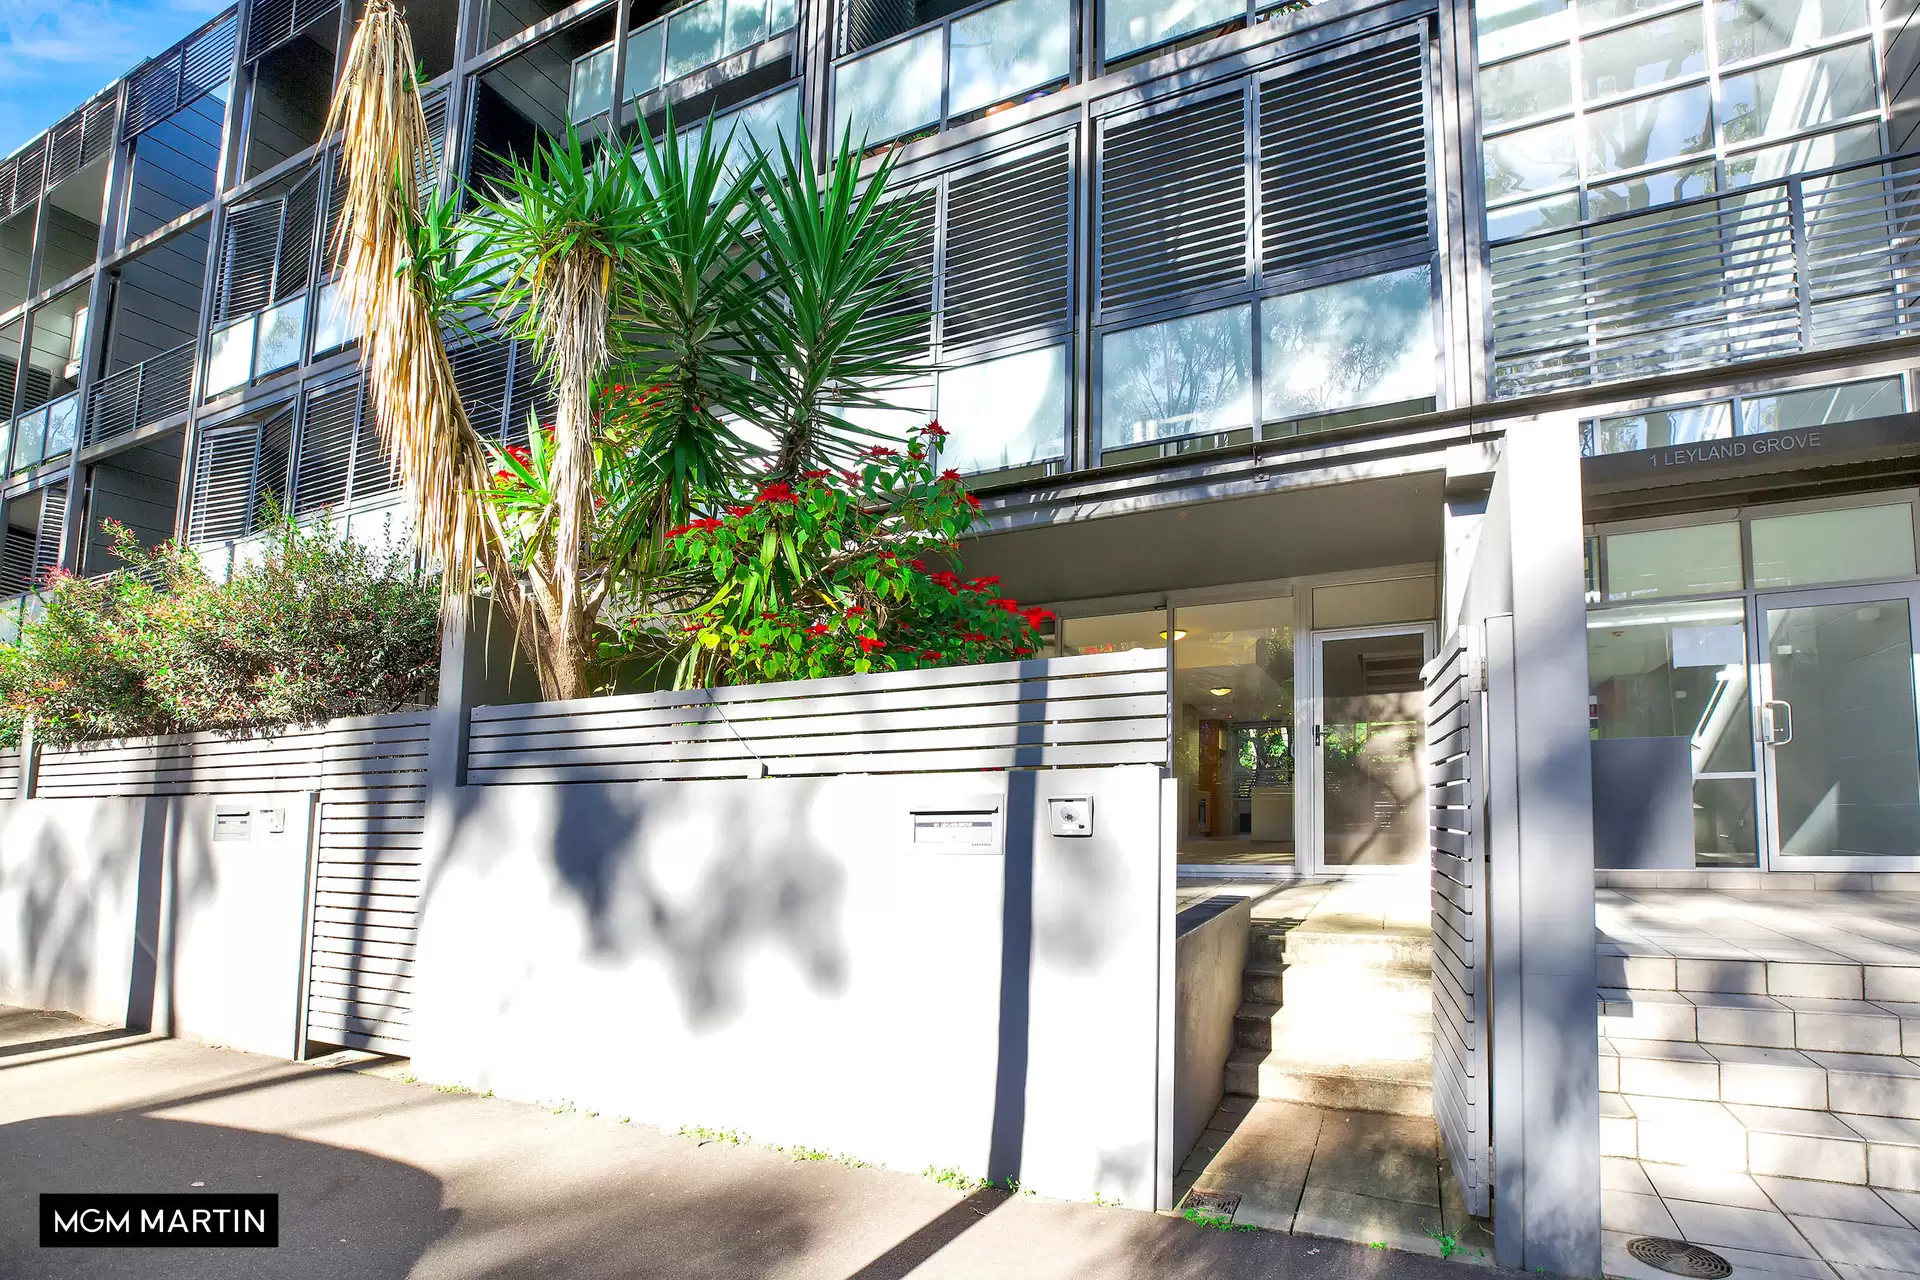 8/1 Leyland Grove, Zetland For Lease by MGM Martin - image 1